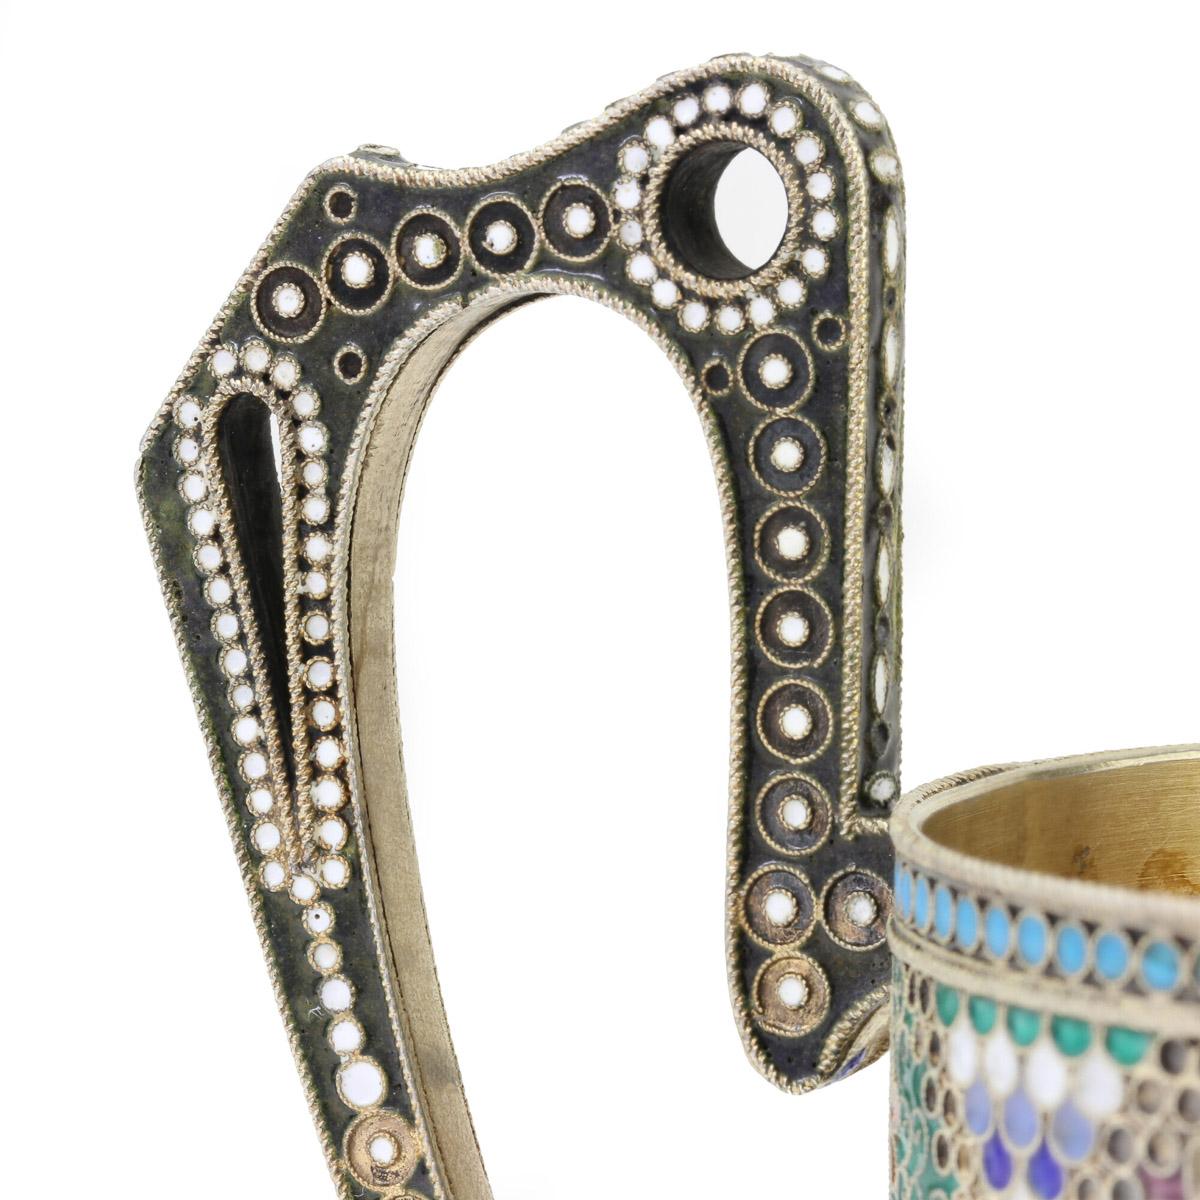 20th Century Imperial Russian Solid Silver-Gilt Enamel Tea Glass Holder, c.1900 7